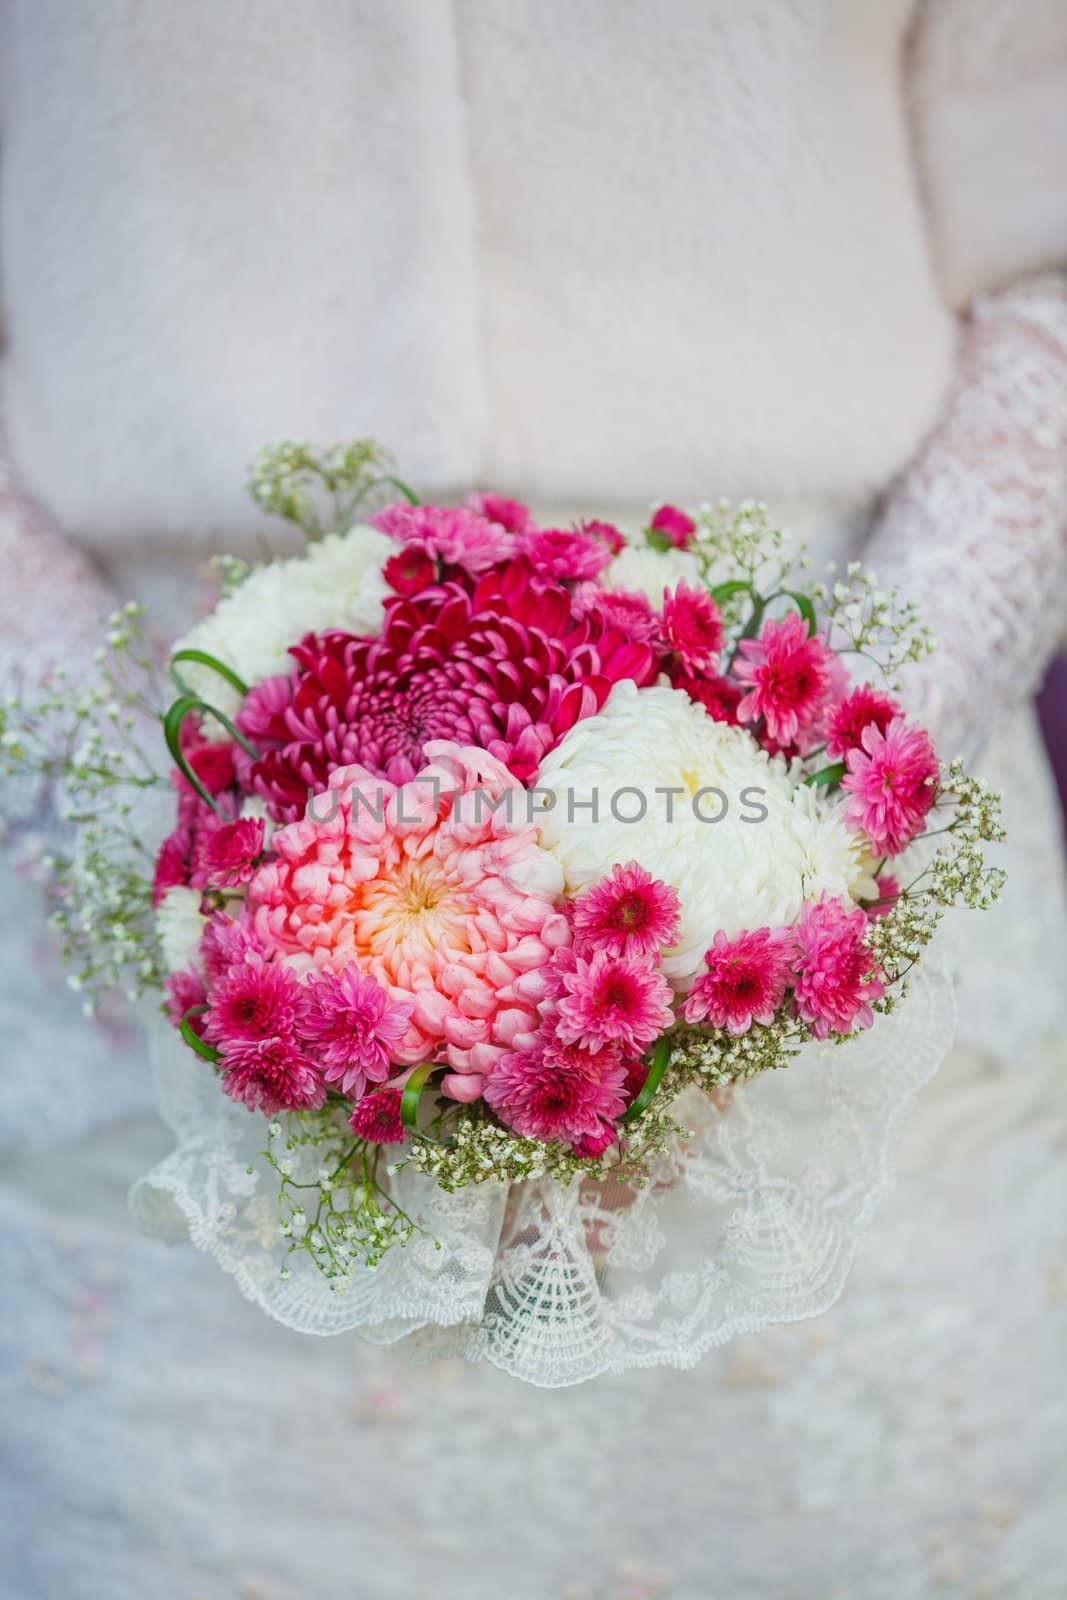 Bride holding purpur wedding bouquet in the yours hand. Vertical view